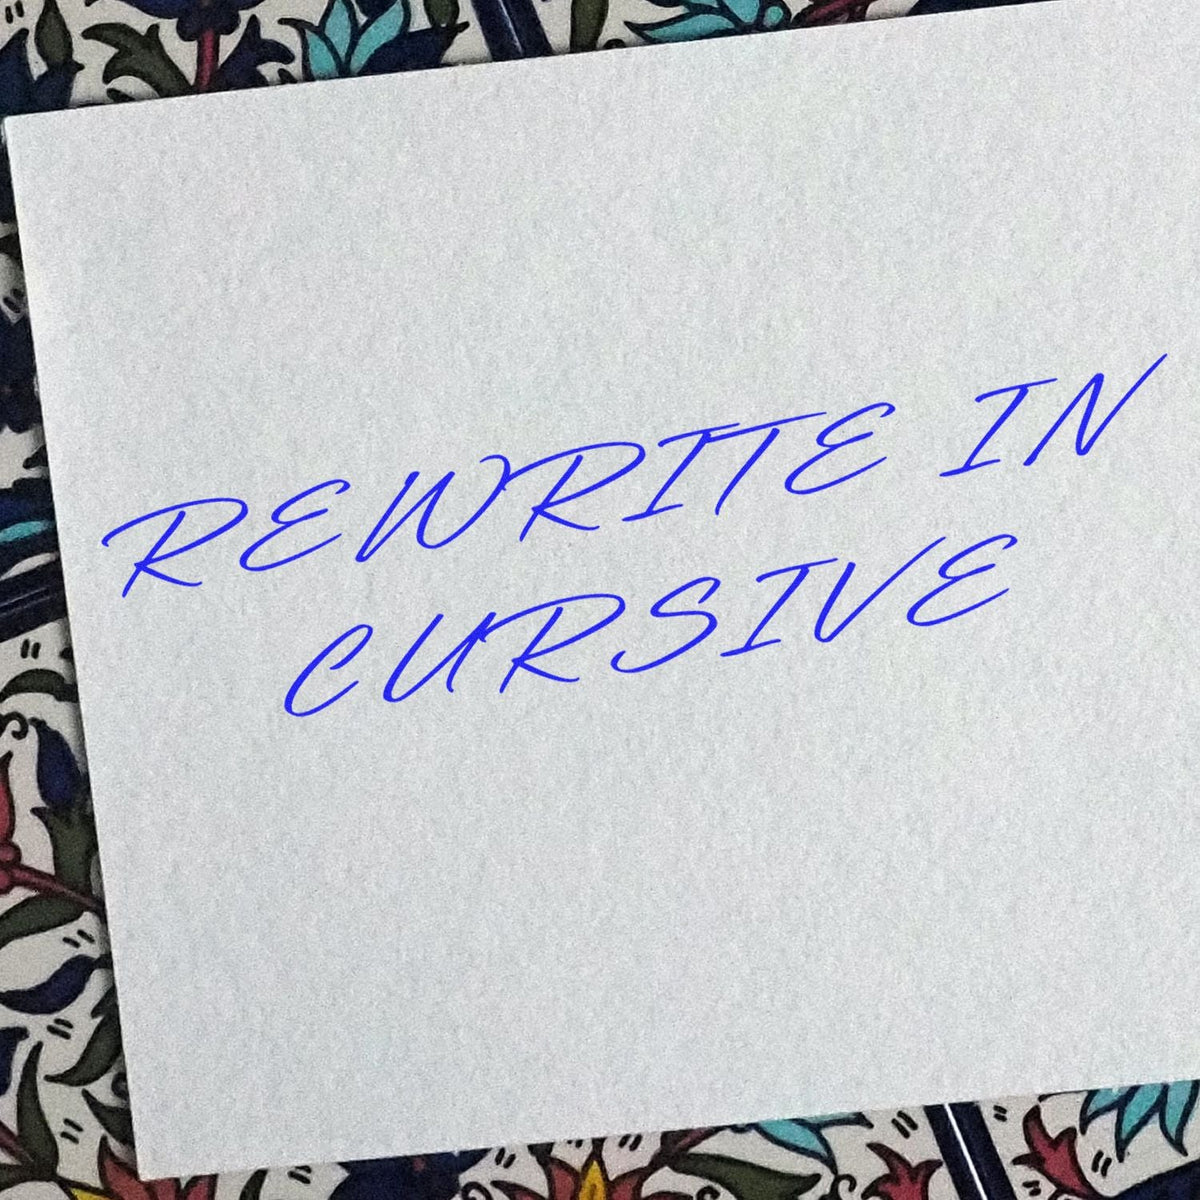 Self Inking Rewrite In Cursive Stamp In Use Photo